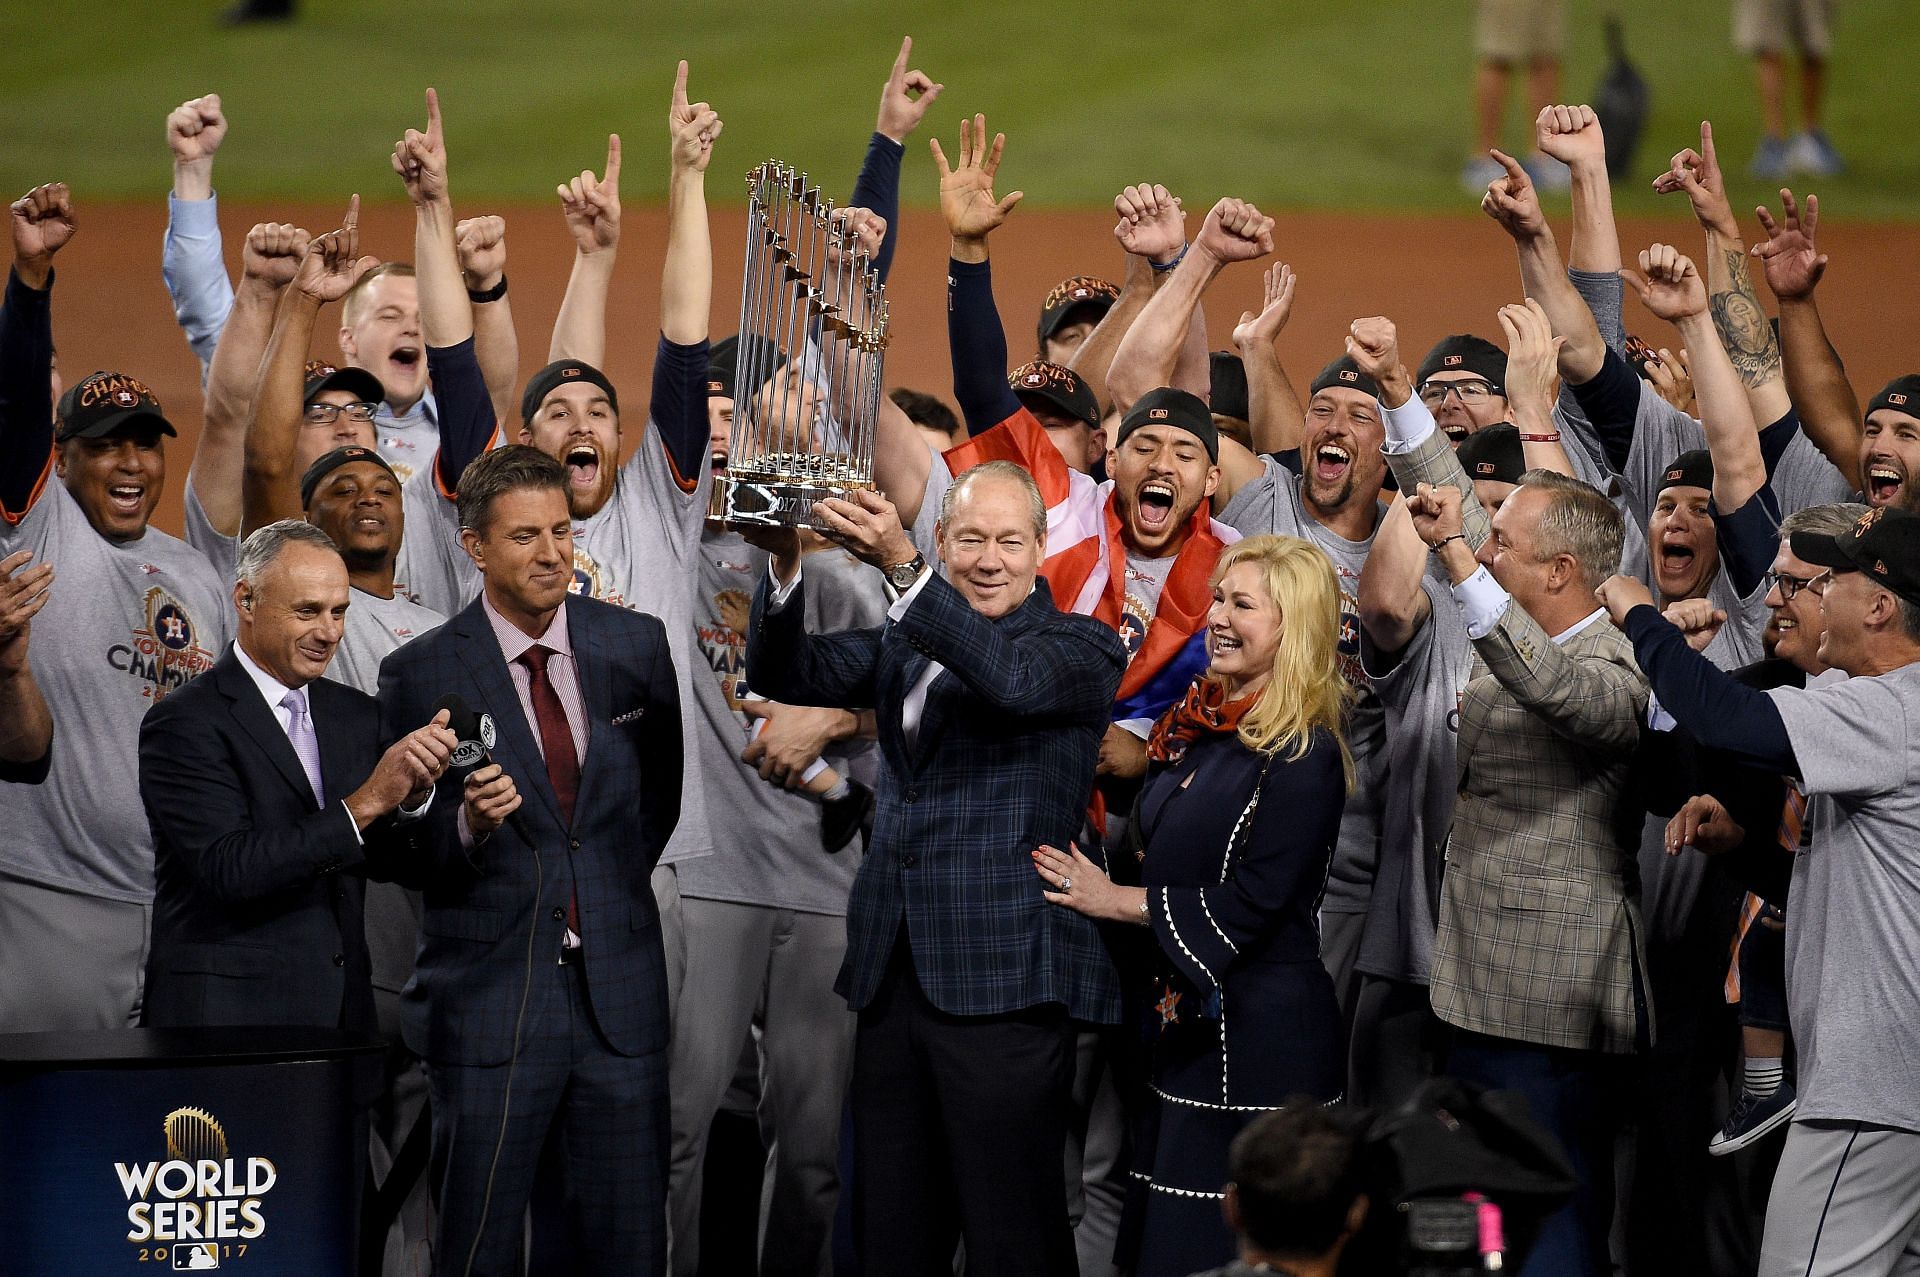 Houston Astros GM James Click Won't Return After World Series Win